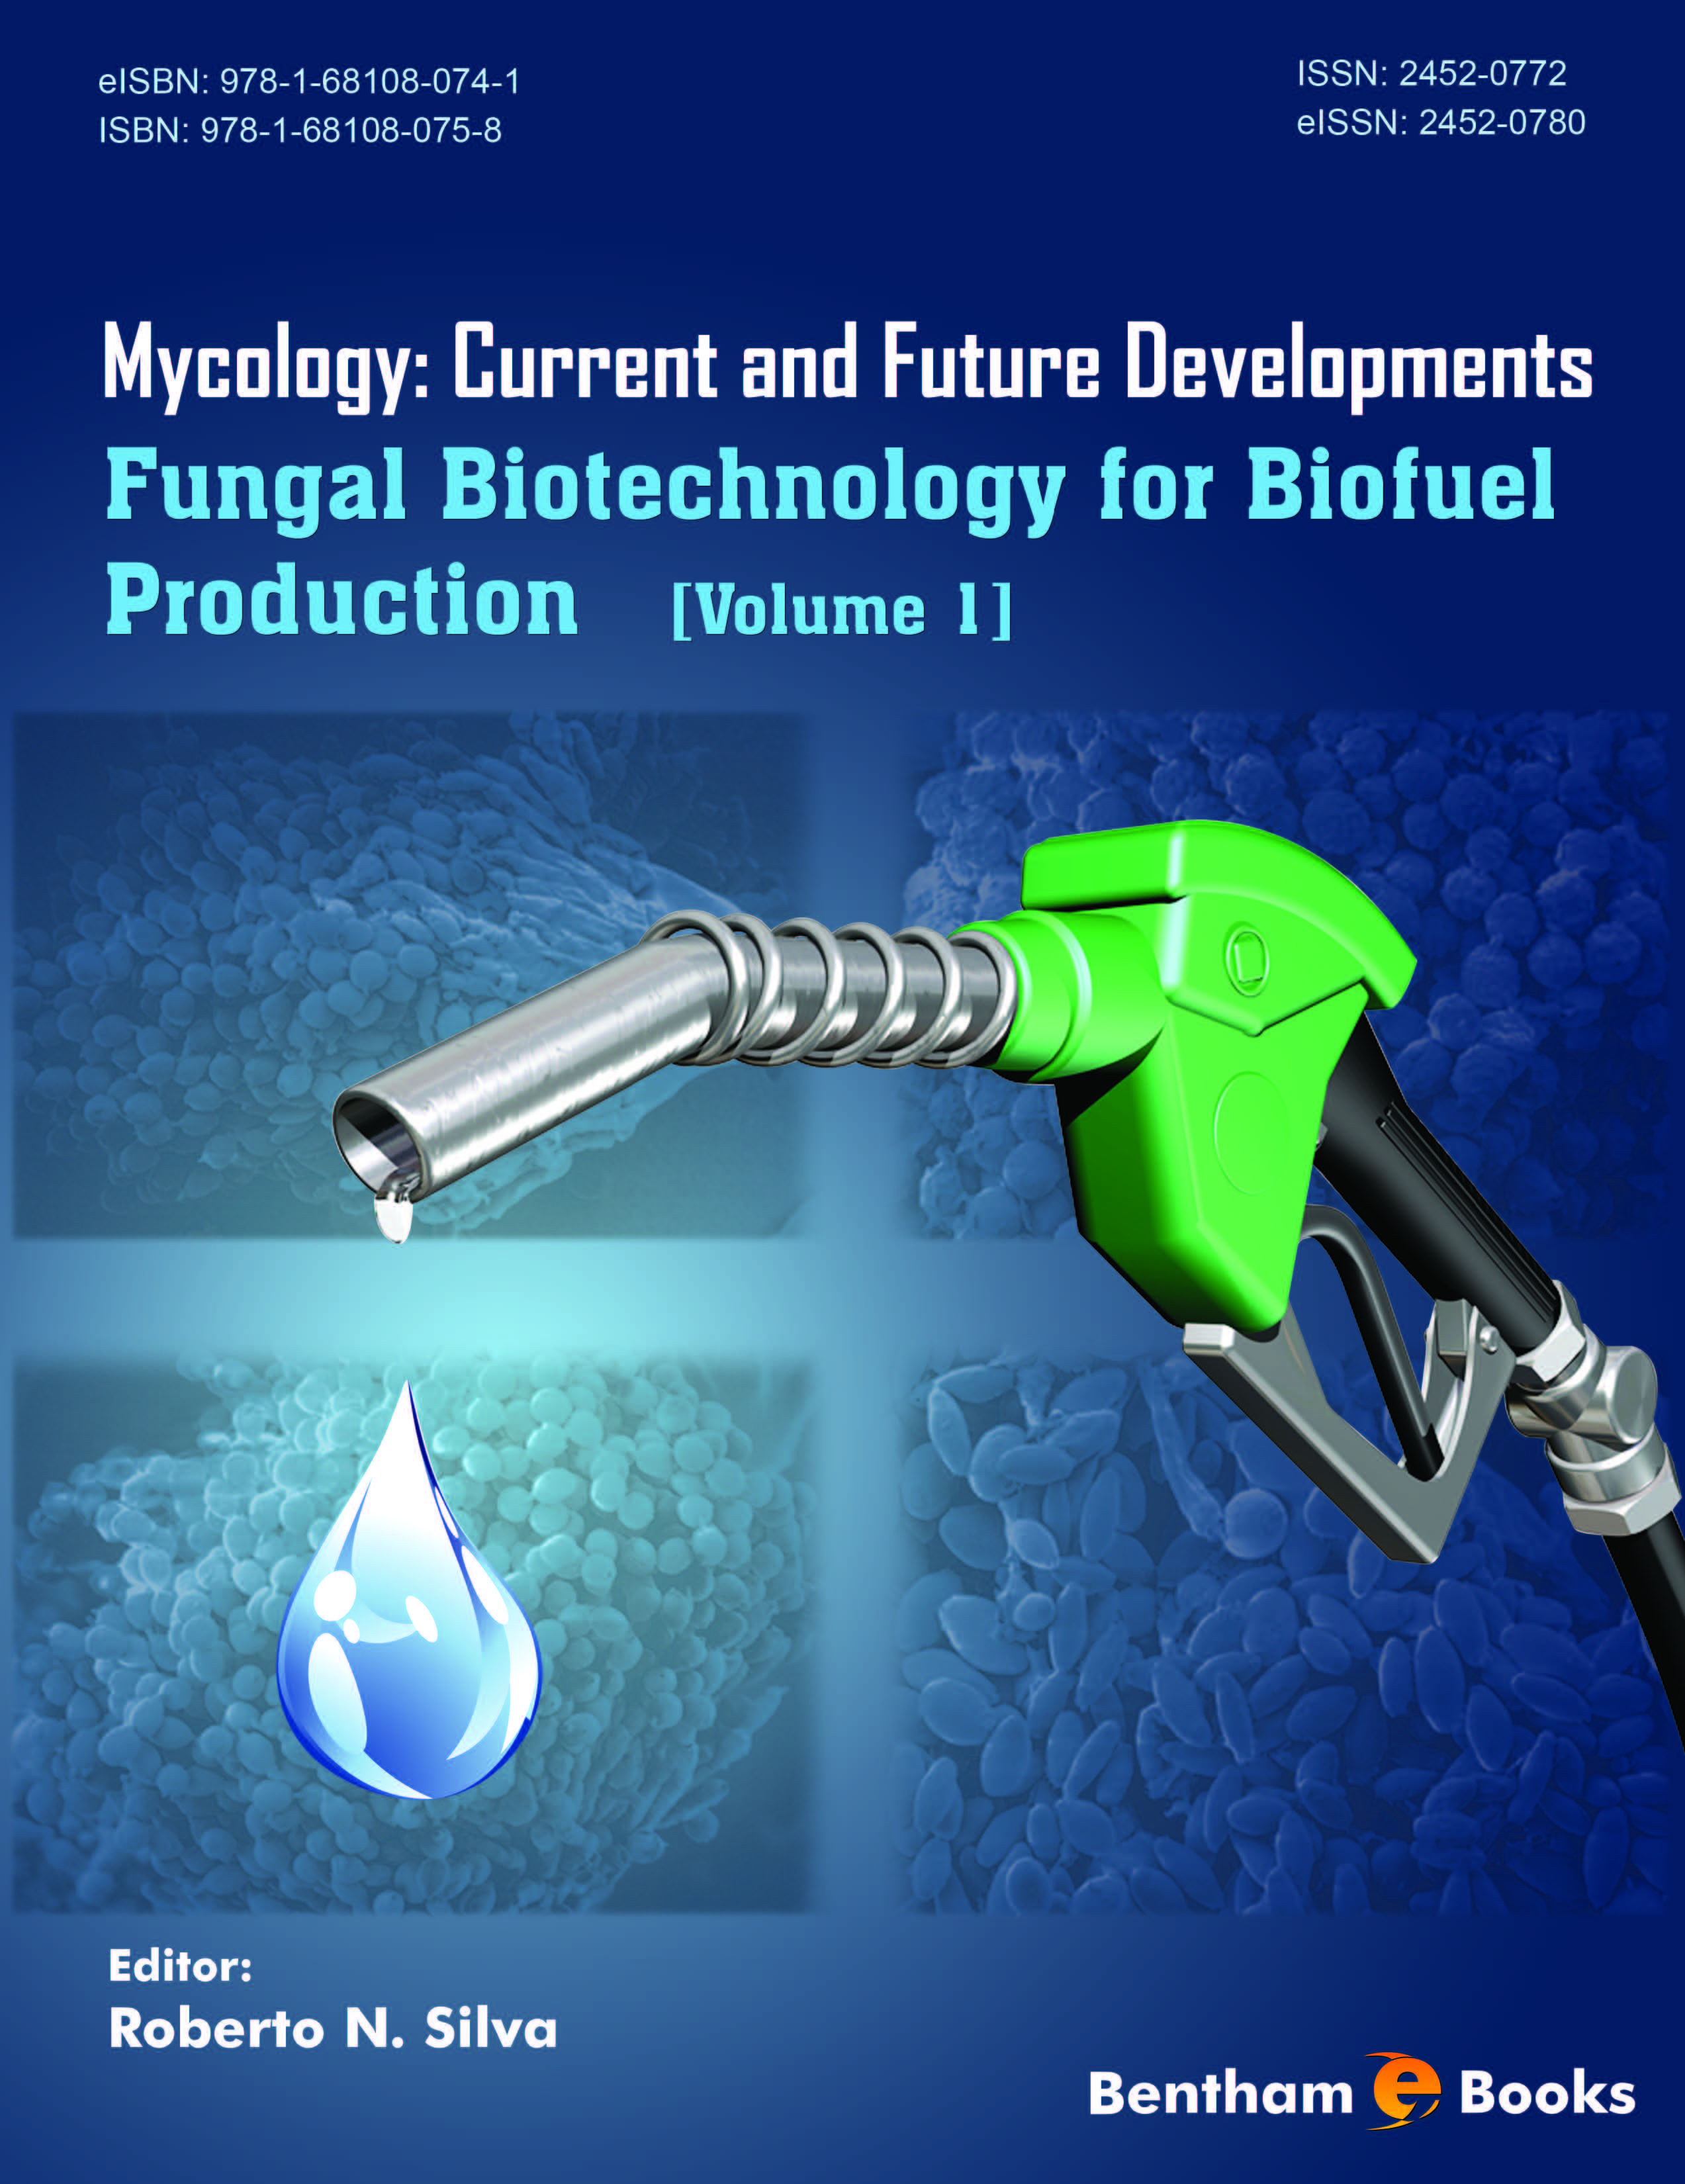 Fungal Biotechnology for Biofuel Production